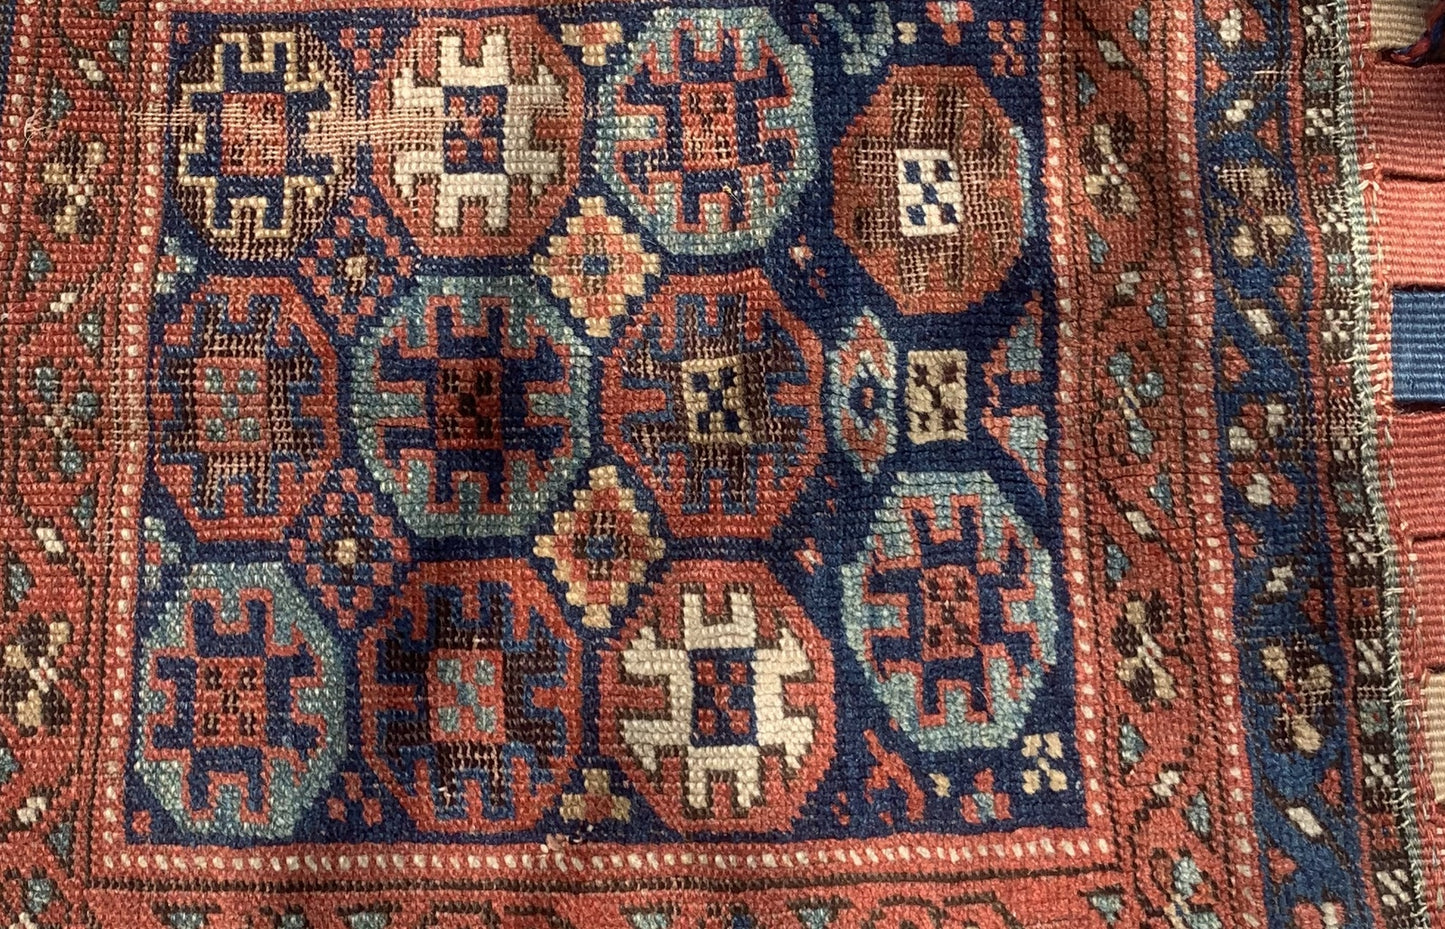 Handmade antique Persian collectible Kurdish bag. The bag is from the end of 19th century in original condition, it has some signs of age.